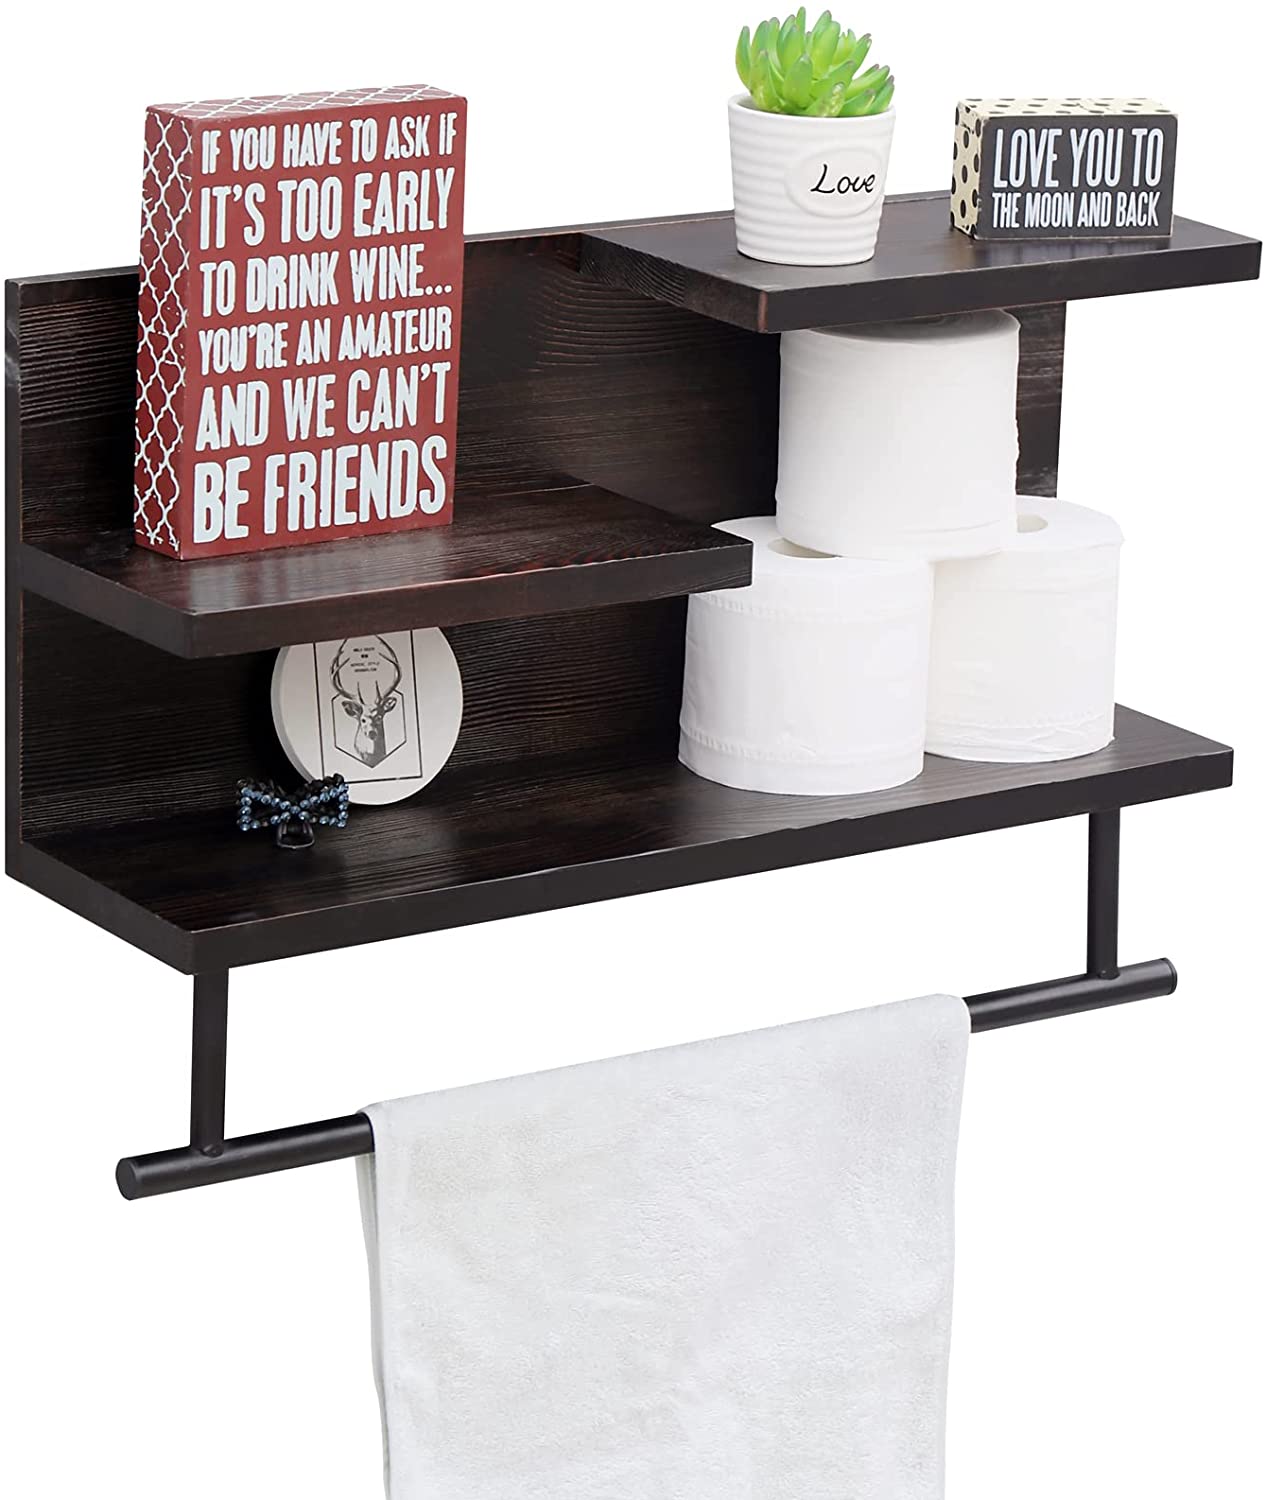 Shower Caddy, Floating Shelves With Towel Bar, Wall Shelves For